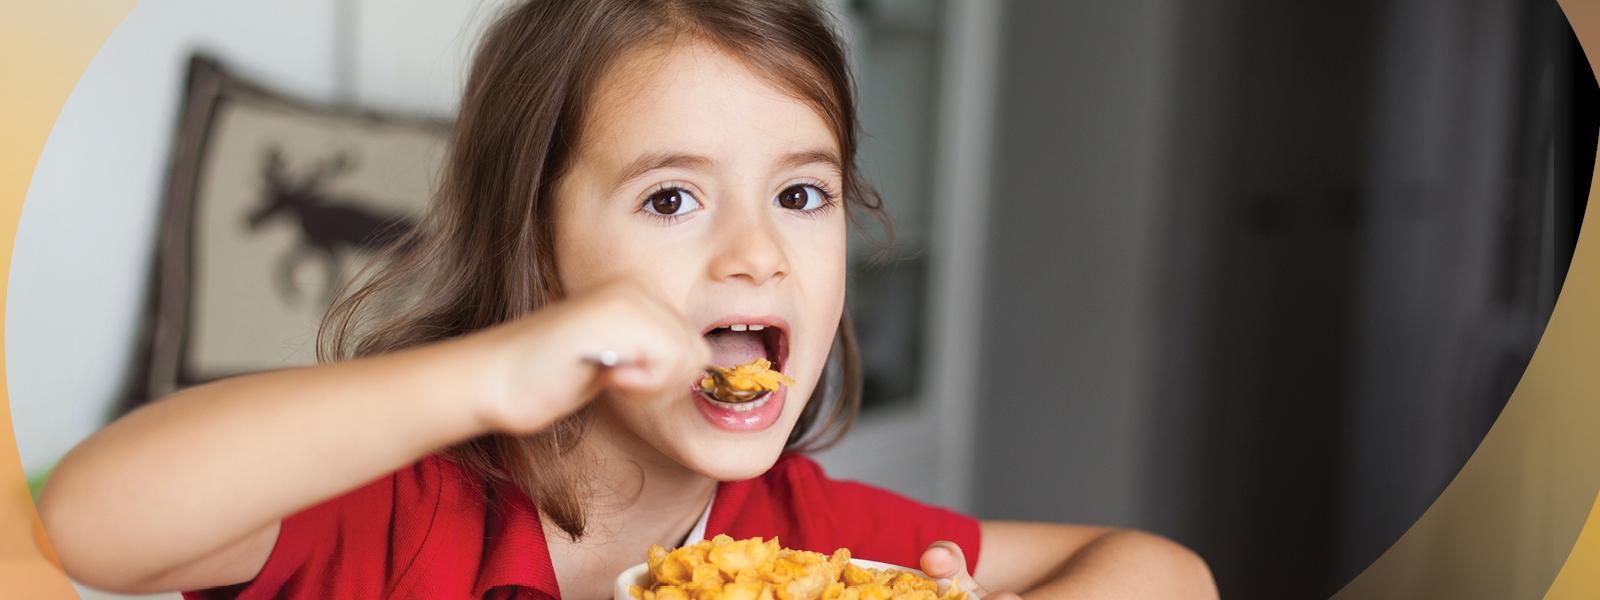 Image of a child eating cereal